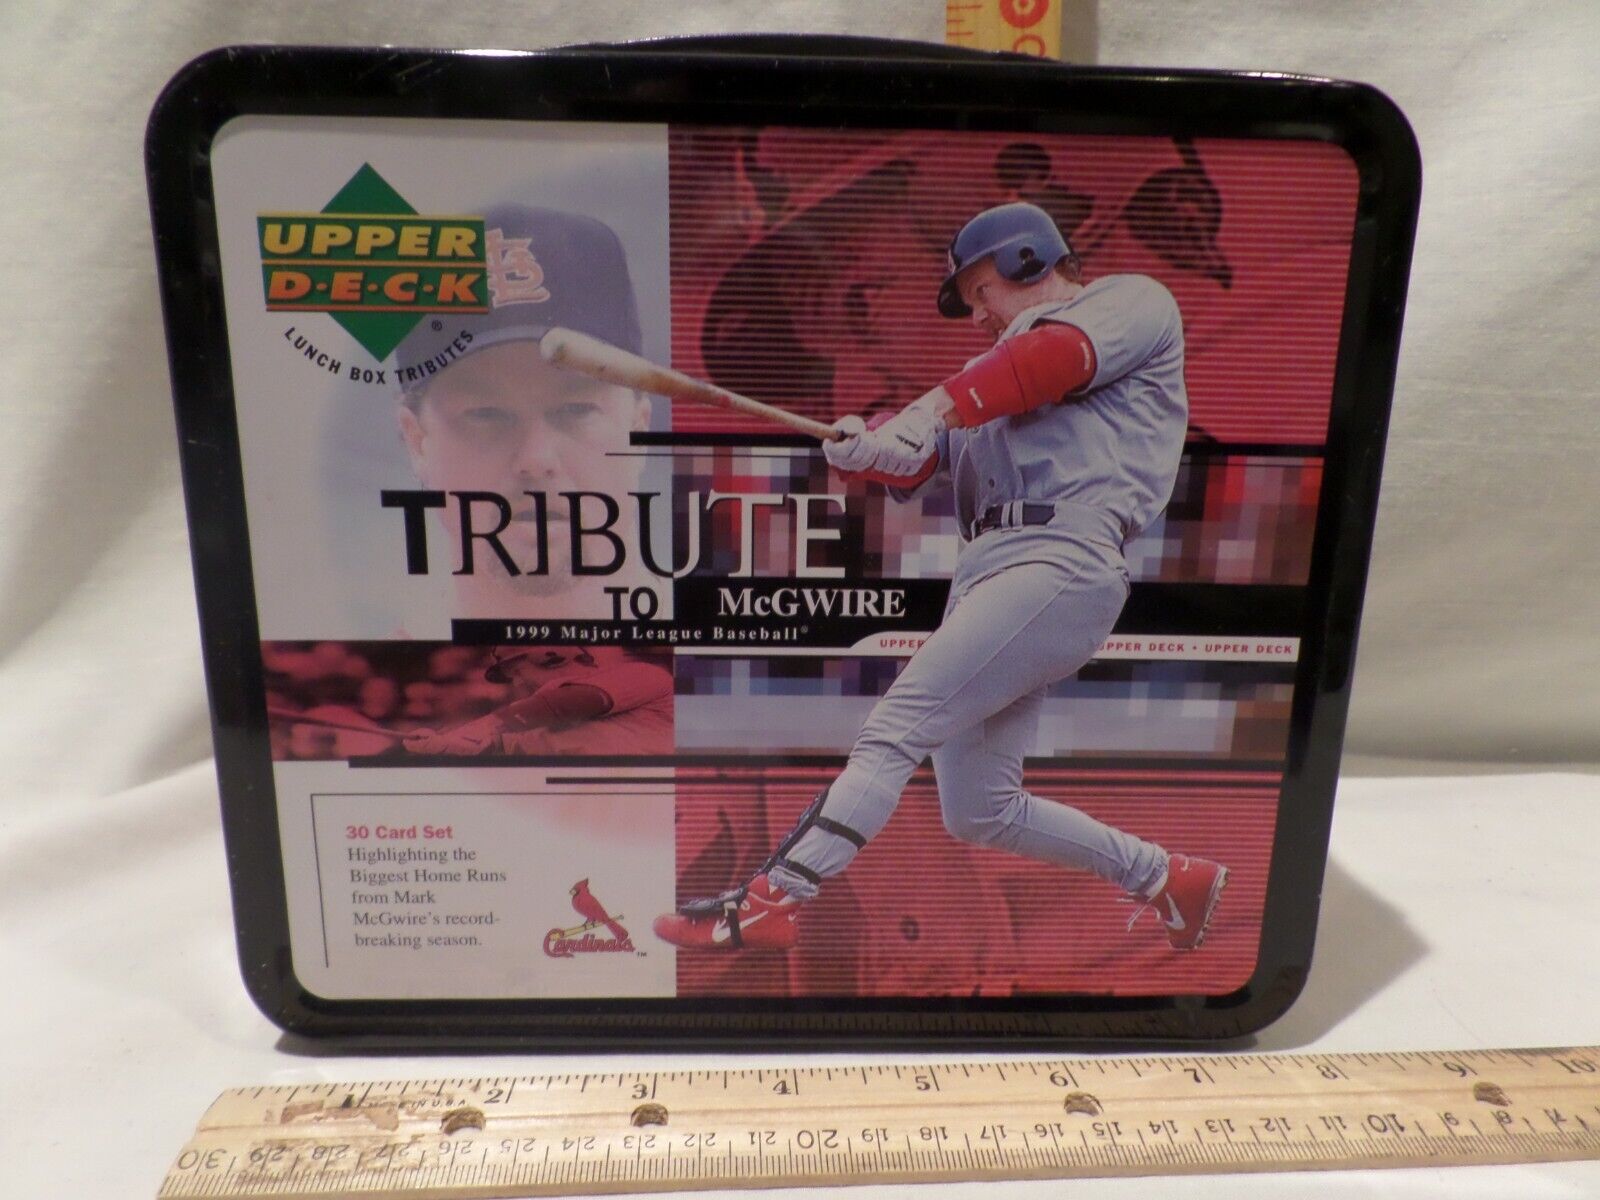 1999 UPPER DECK TRIBUTE TO MARK McGWIRE LUNCH BOX WITH 30-CARD SET FACTORY SEAL